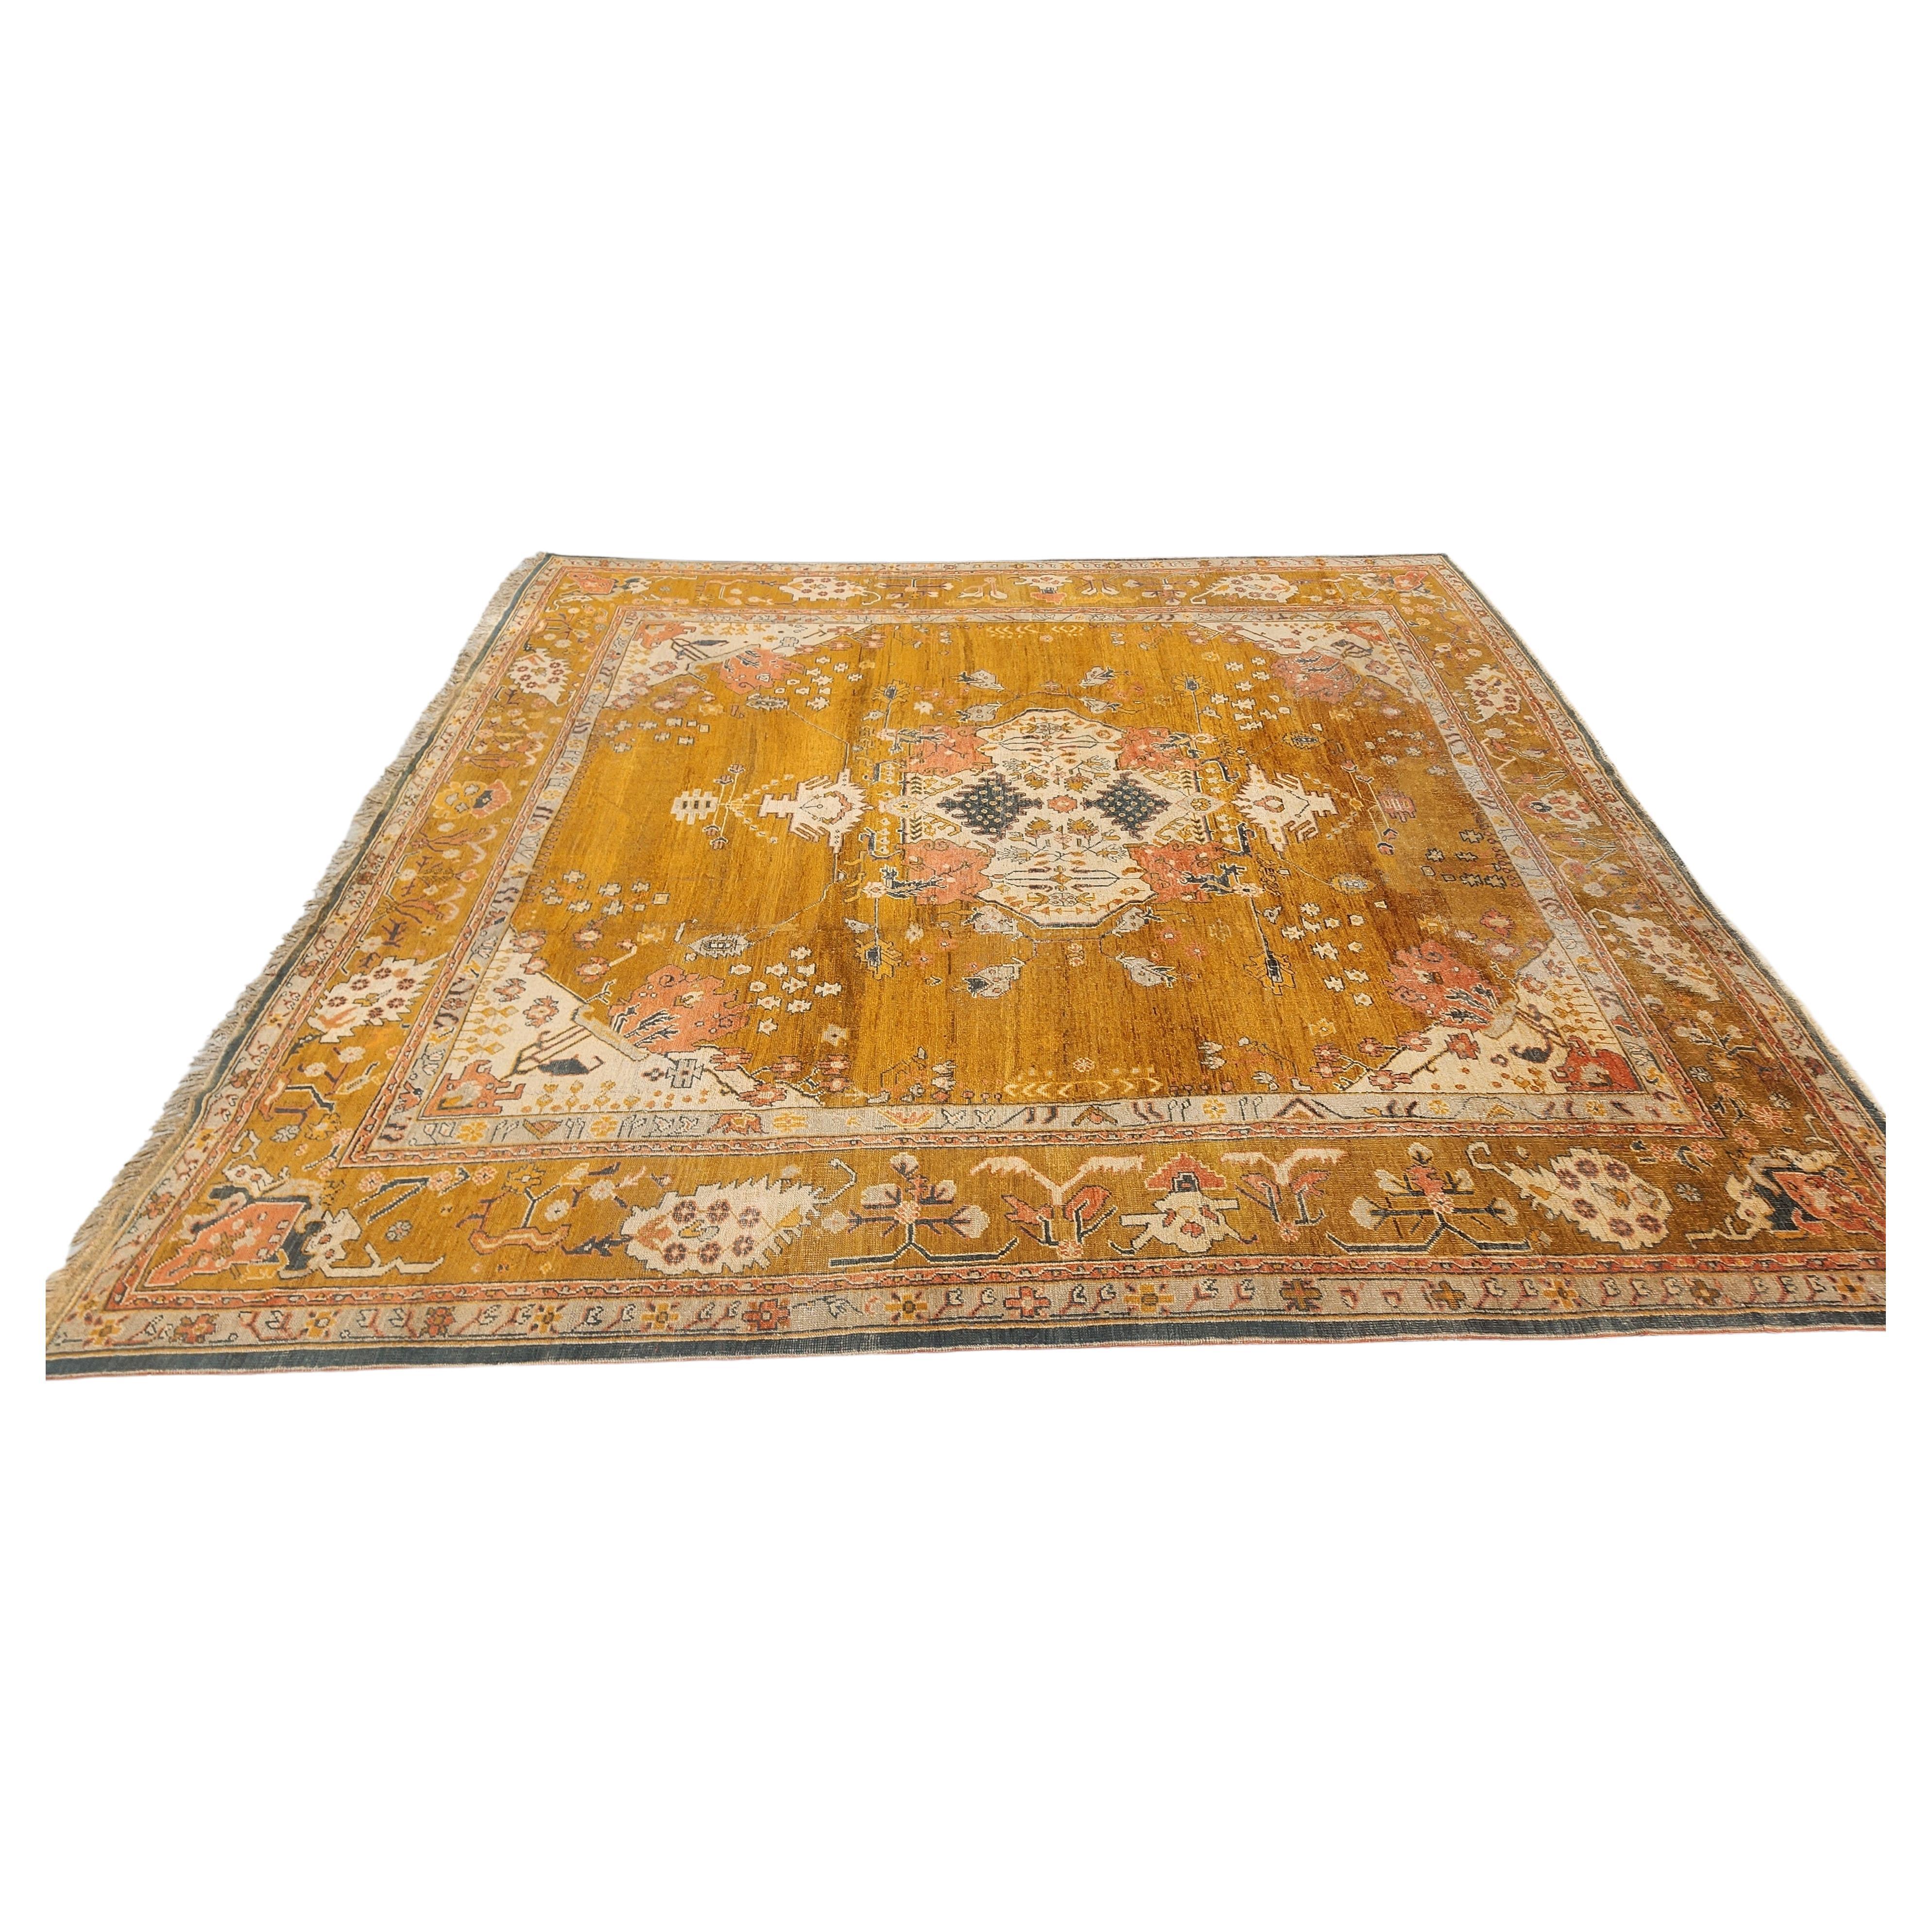 Great condition . Acquired from a private Malibu Estate. Dated 1920s . Beautiful boasting colors. 
Oushak rugs, also known as Ushak rugs, are woven in Western Turkey and have distinct designs, such as angular large-scale floral patterns. They